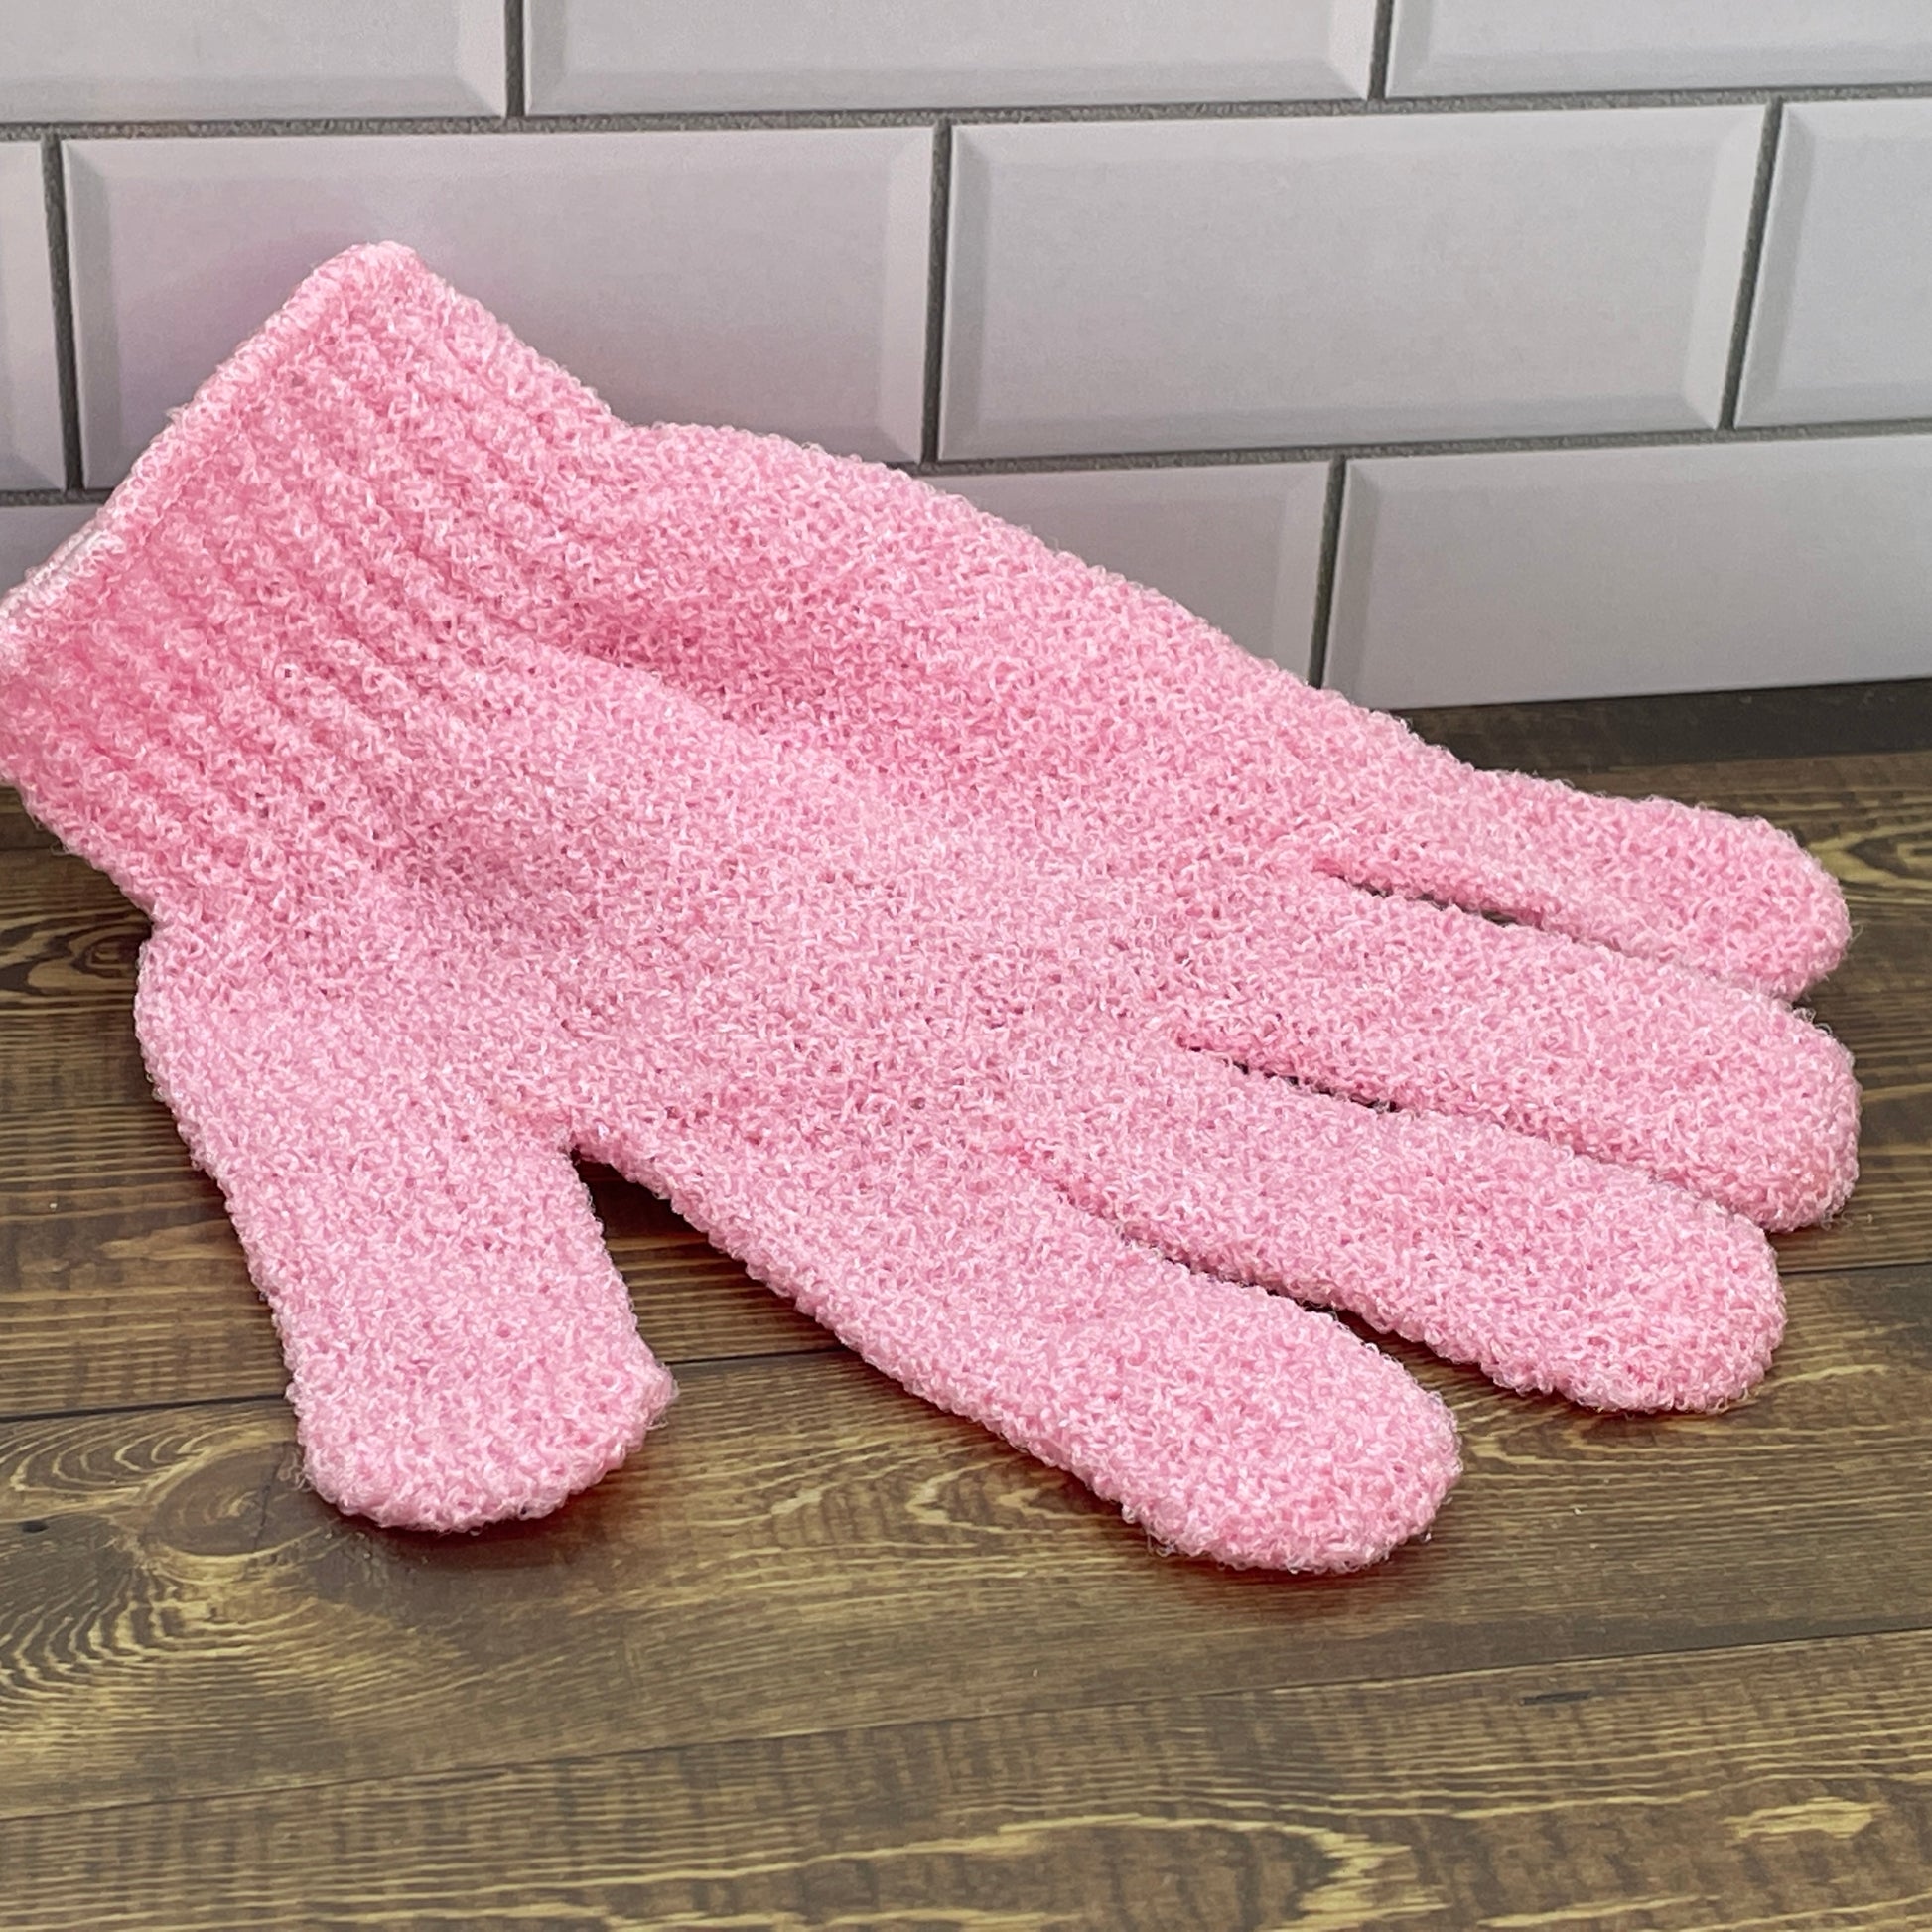 Exfoliating Bath and Shower Glove in 3 Colors - Soapworks Factory (5982048551069)